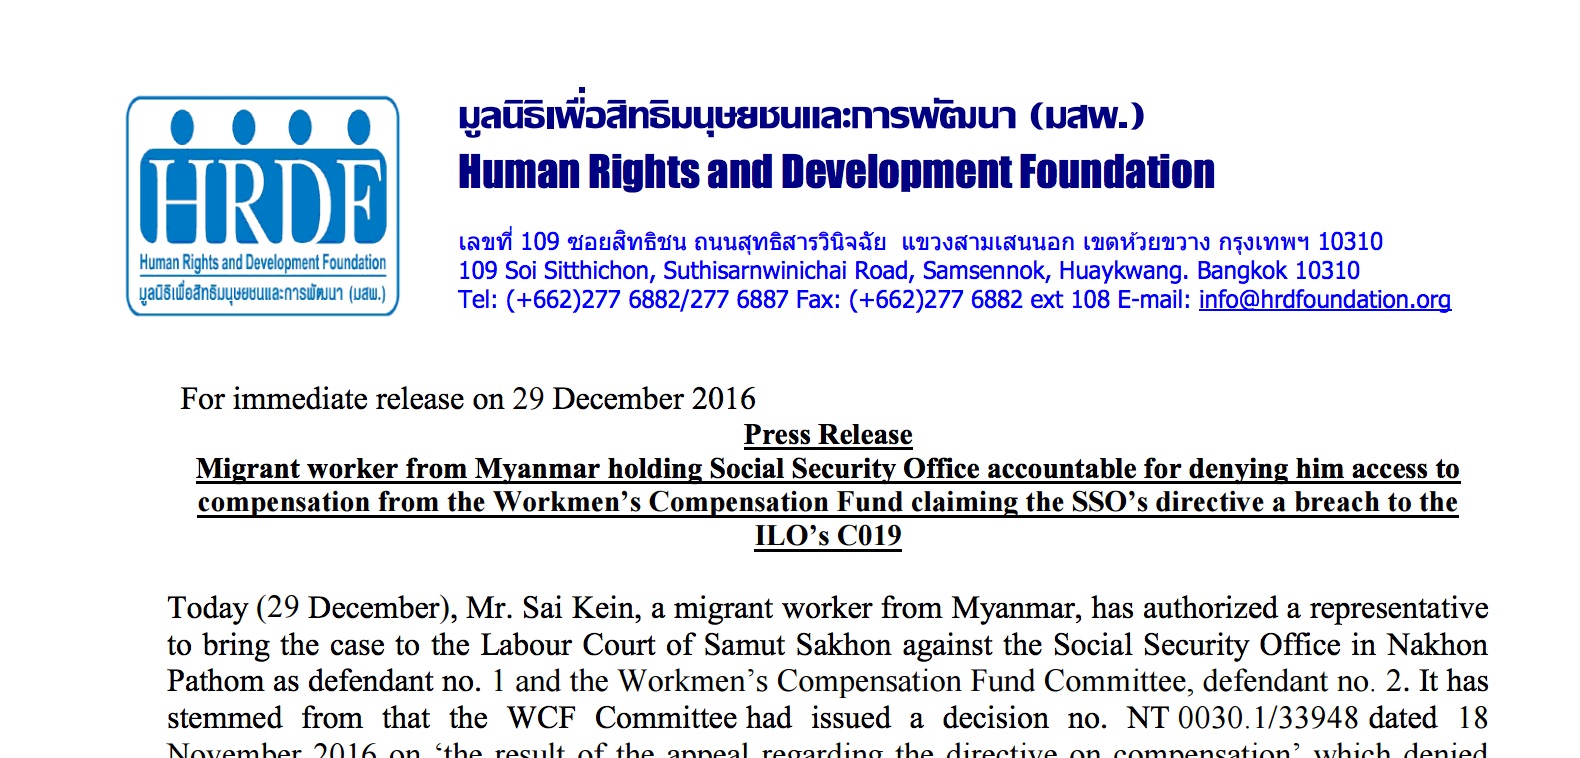 Migrant worker from Myanmar holding Social Security Office accountable for denying him access to compensation from the Workmen’s Compensation Fund claiming the SSO’s directive a breach to the ILO’s C019